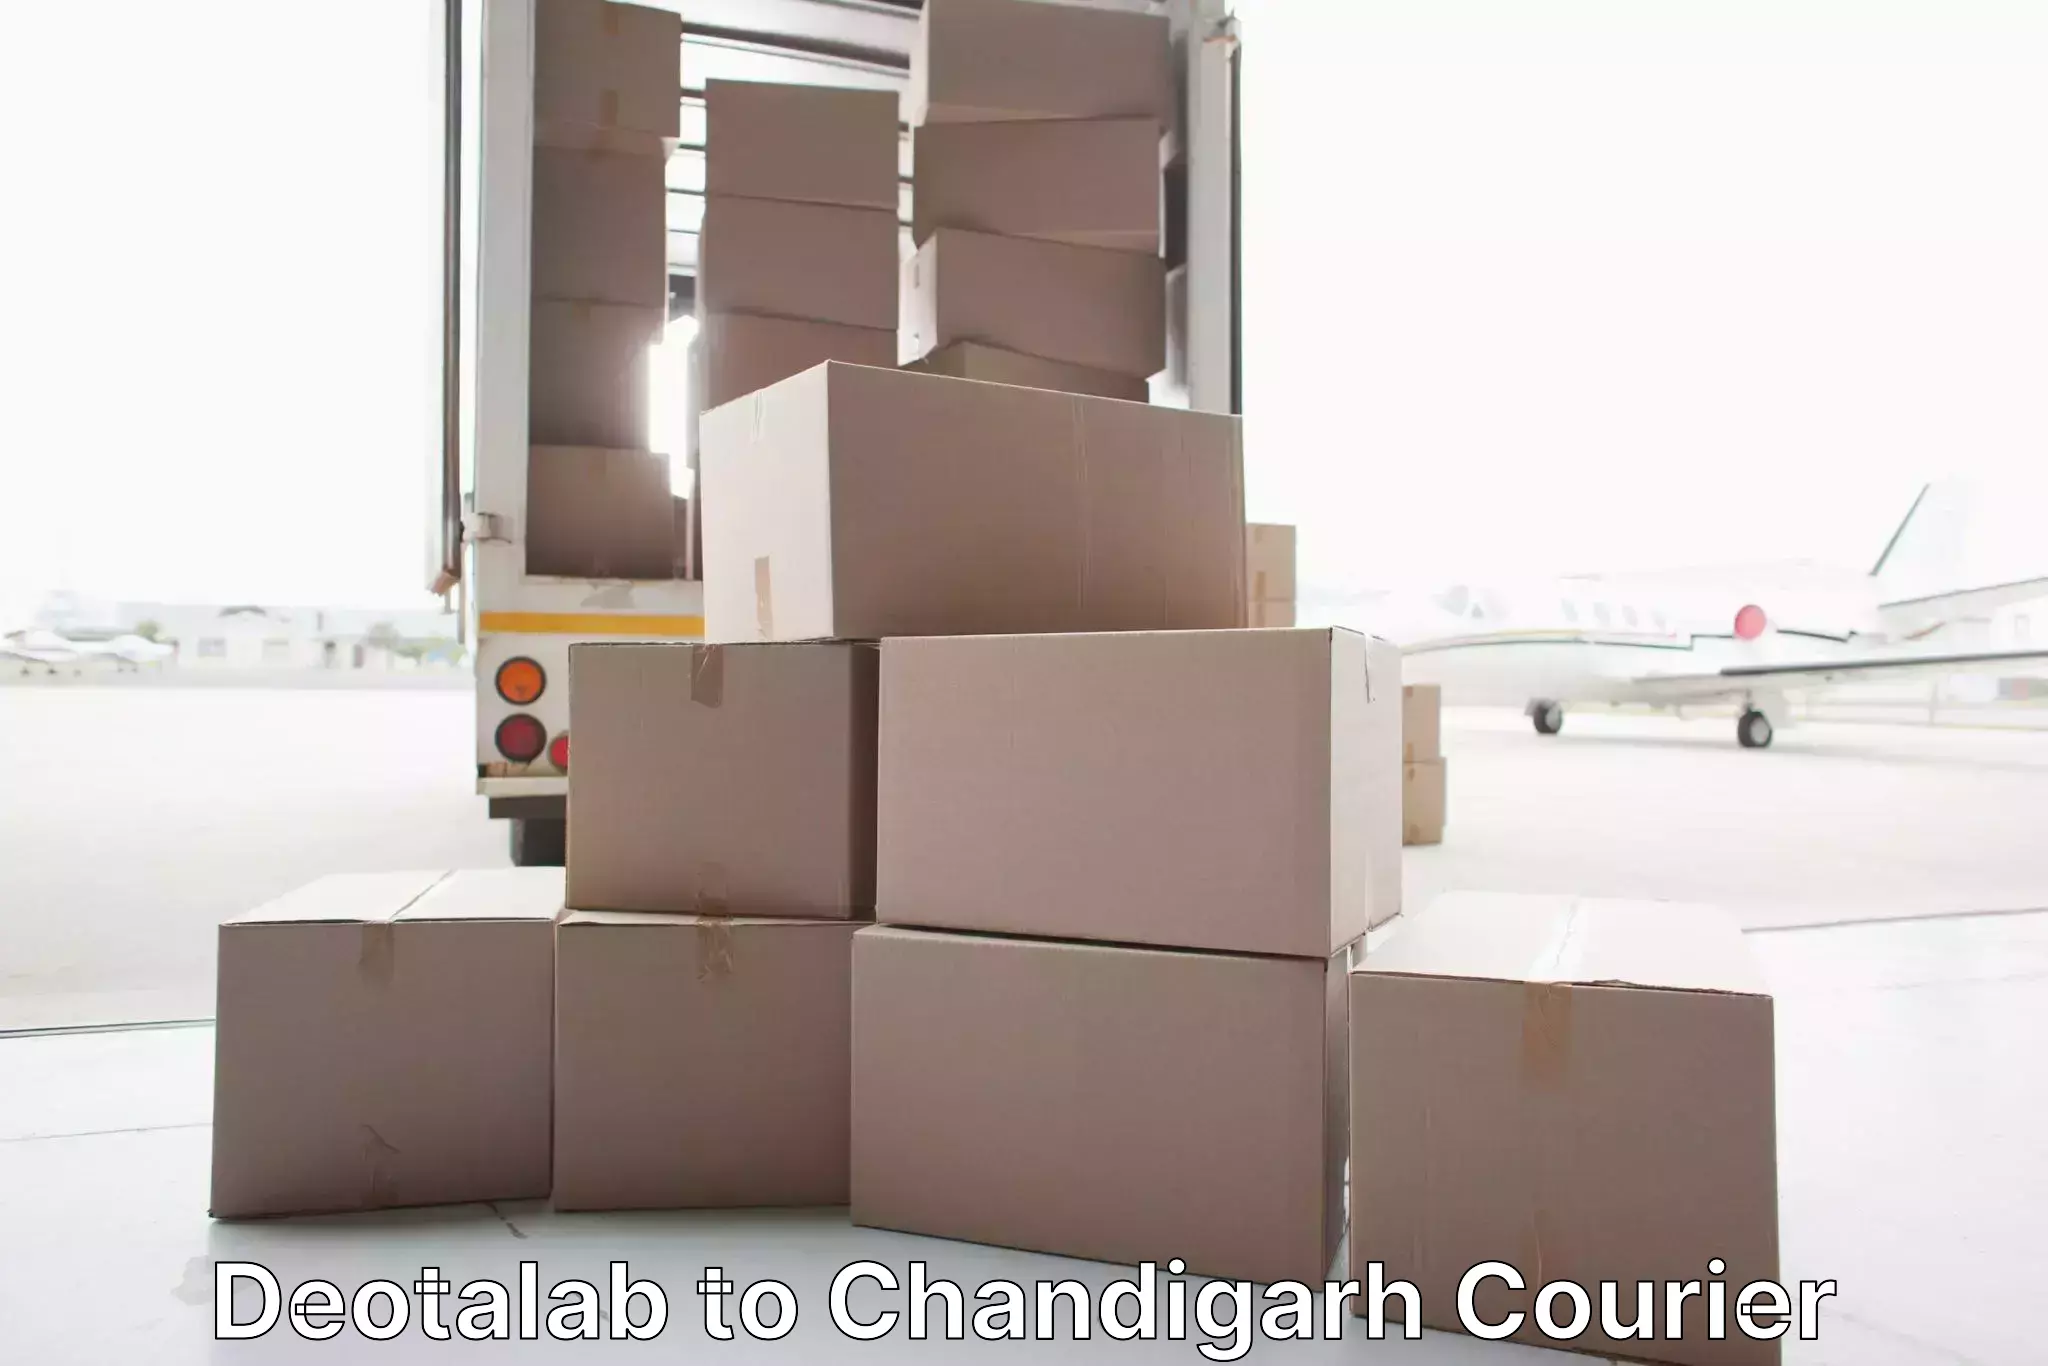 Full-service relocation in Deotalab to Chandigarh